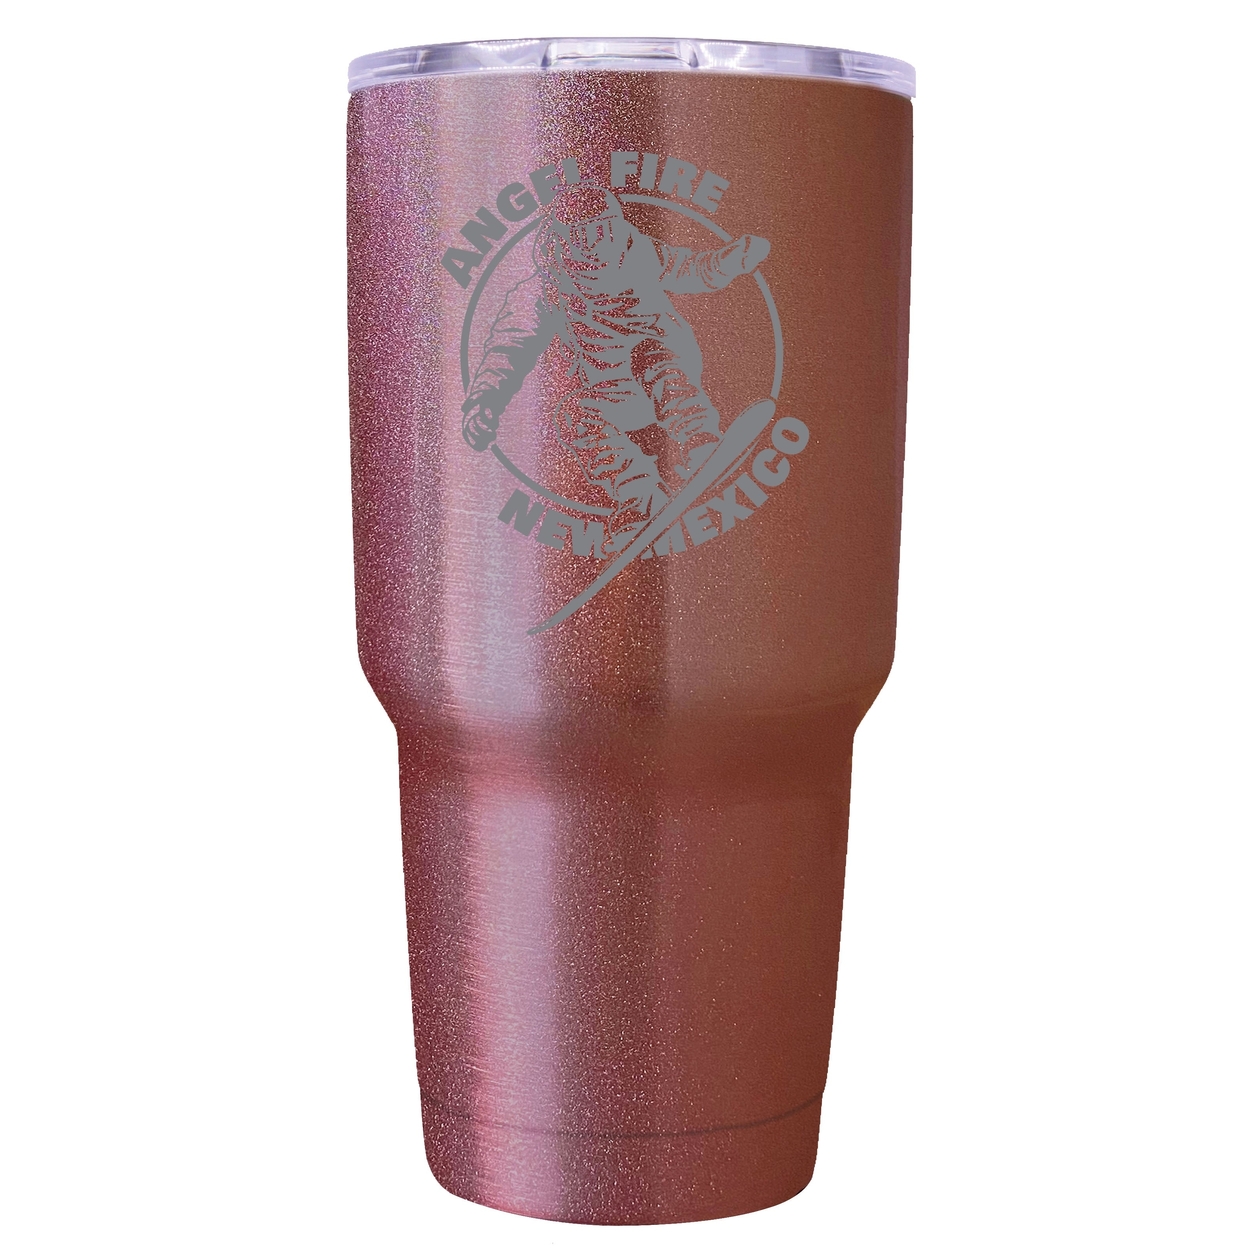 Angel Fire New Mexico Souvenir 24 Oz Engraved Insulated Stainless Steel Tumbler - Rose Gold,,Single Unit